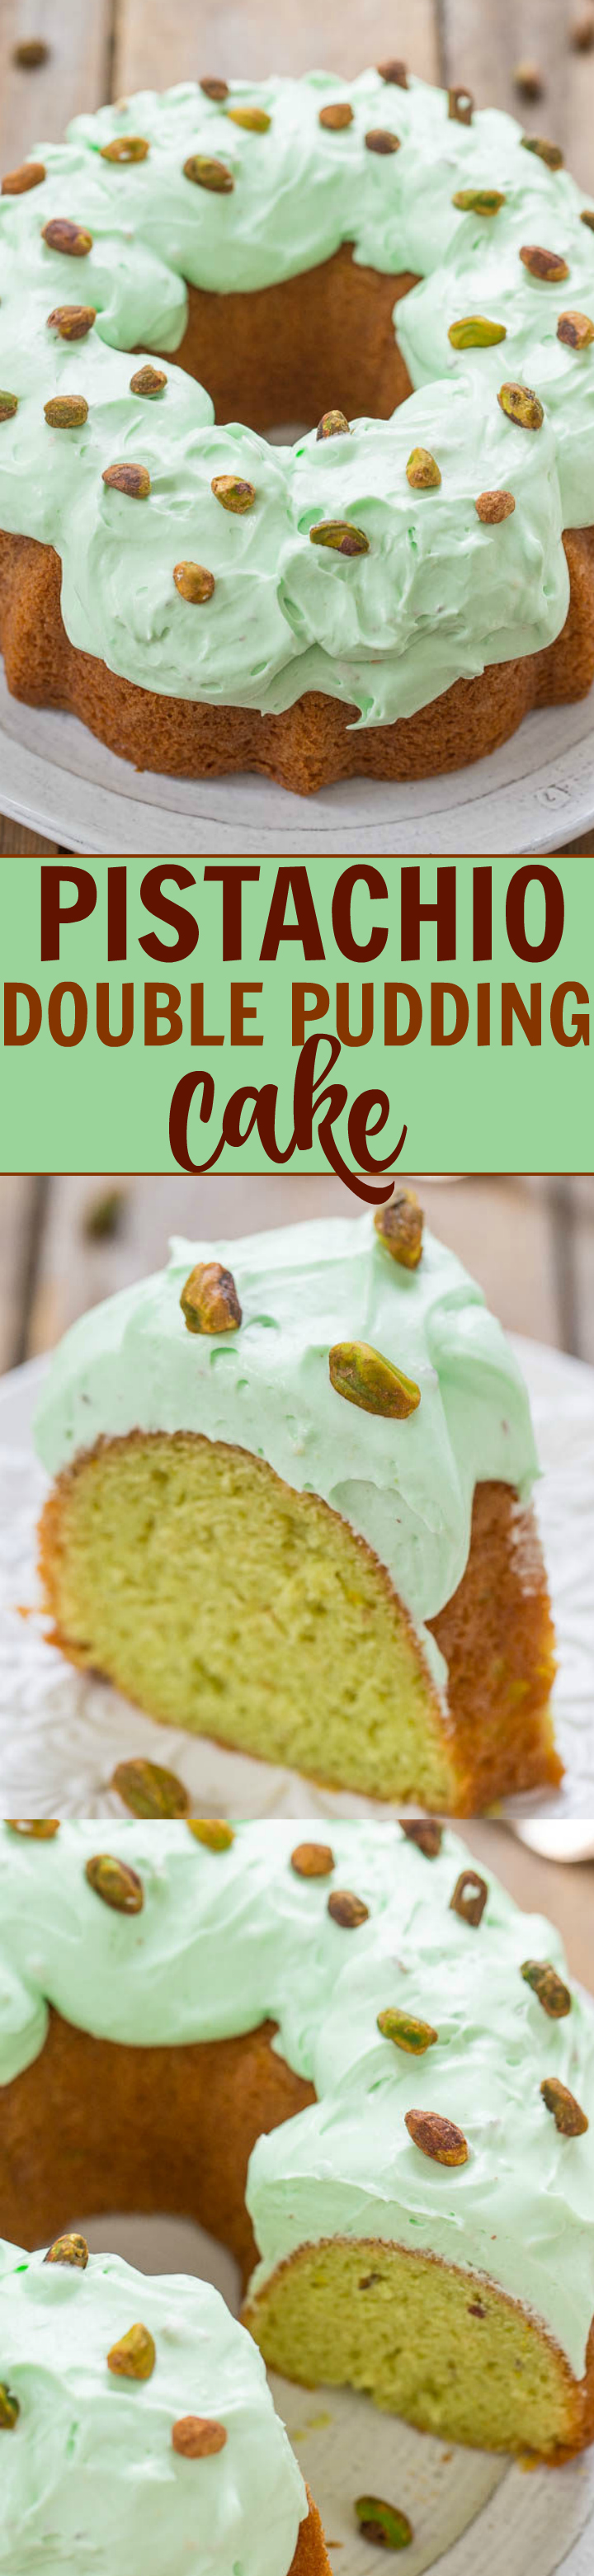 Pistachio Cake - There's pistachio pudding in the soft cake AND in the fluffy whipped frosting!! Pistachio fans are going to love this retro-inspired cake that's EASY and DELICIOUS!!